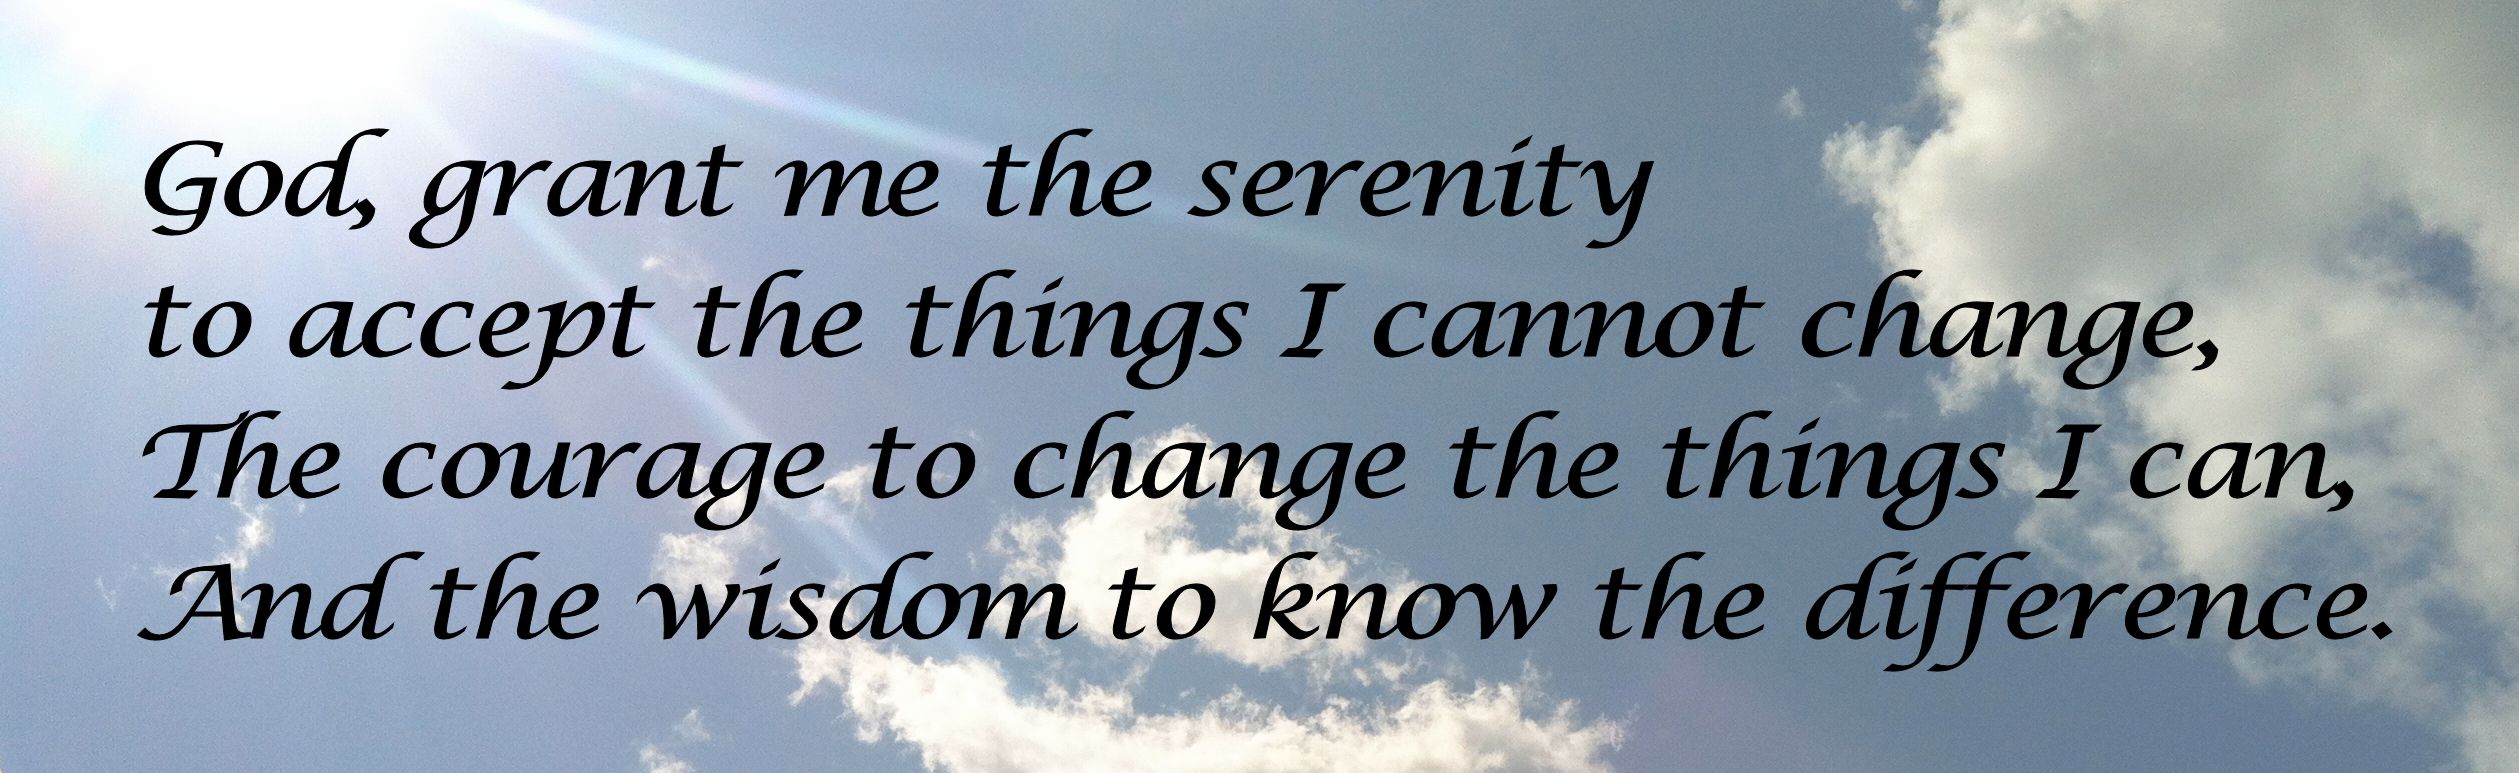 God, grant me the serenity to accept the things I cannot change, The courage to change the things I can, And the wisdom to know the difference.